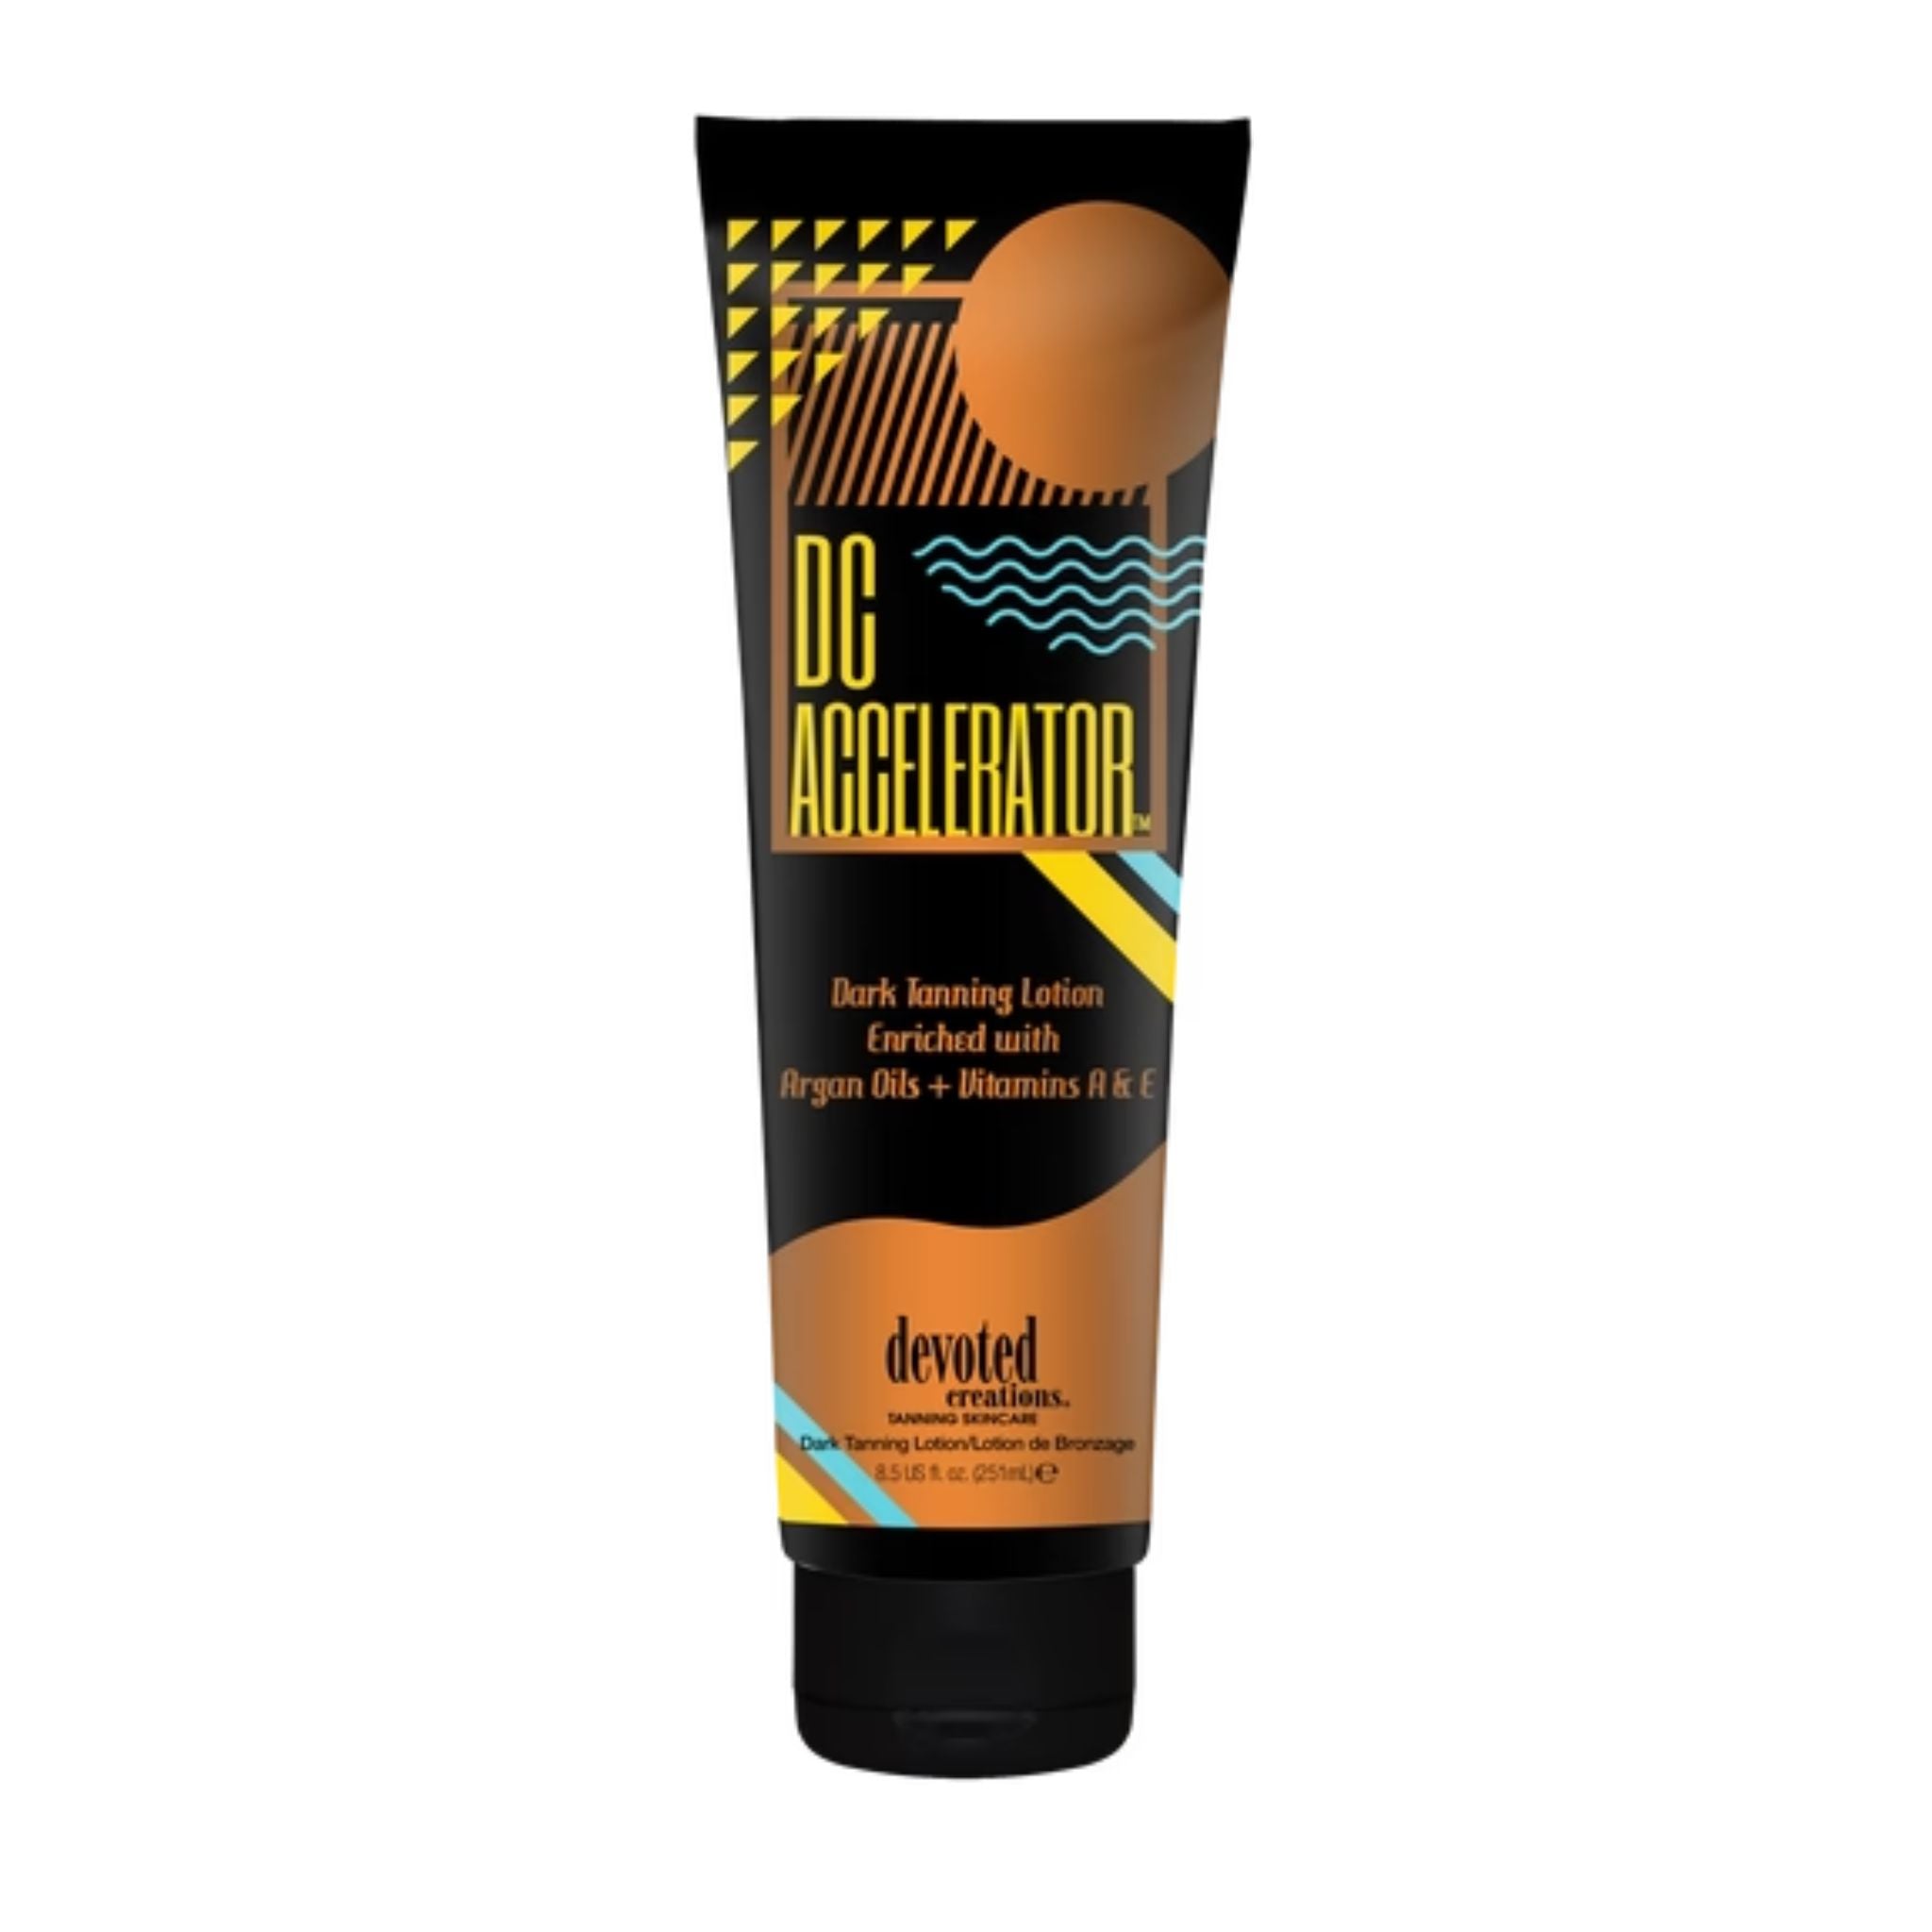 Devoted Creations DC Accelerator Tanning Lotion Tanning Lotion